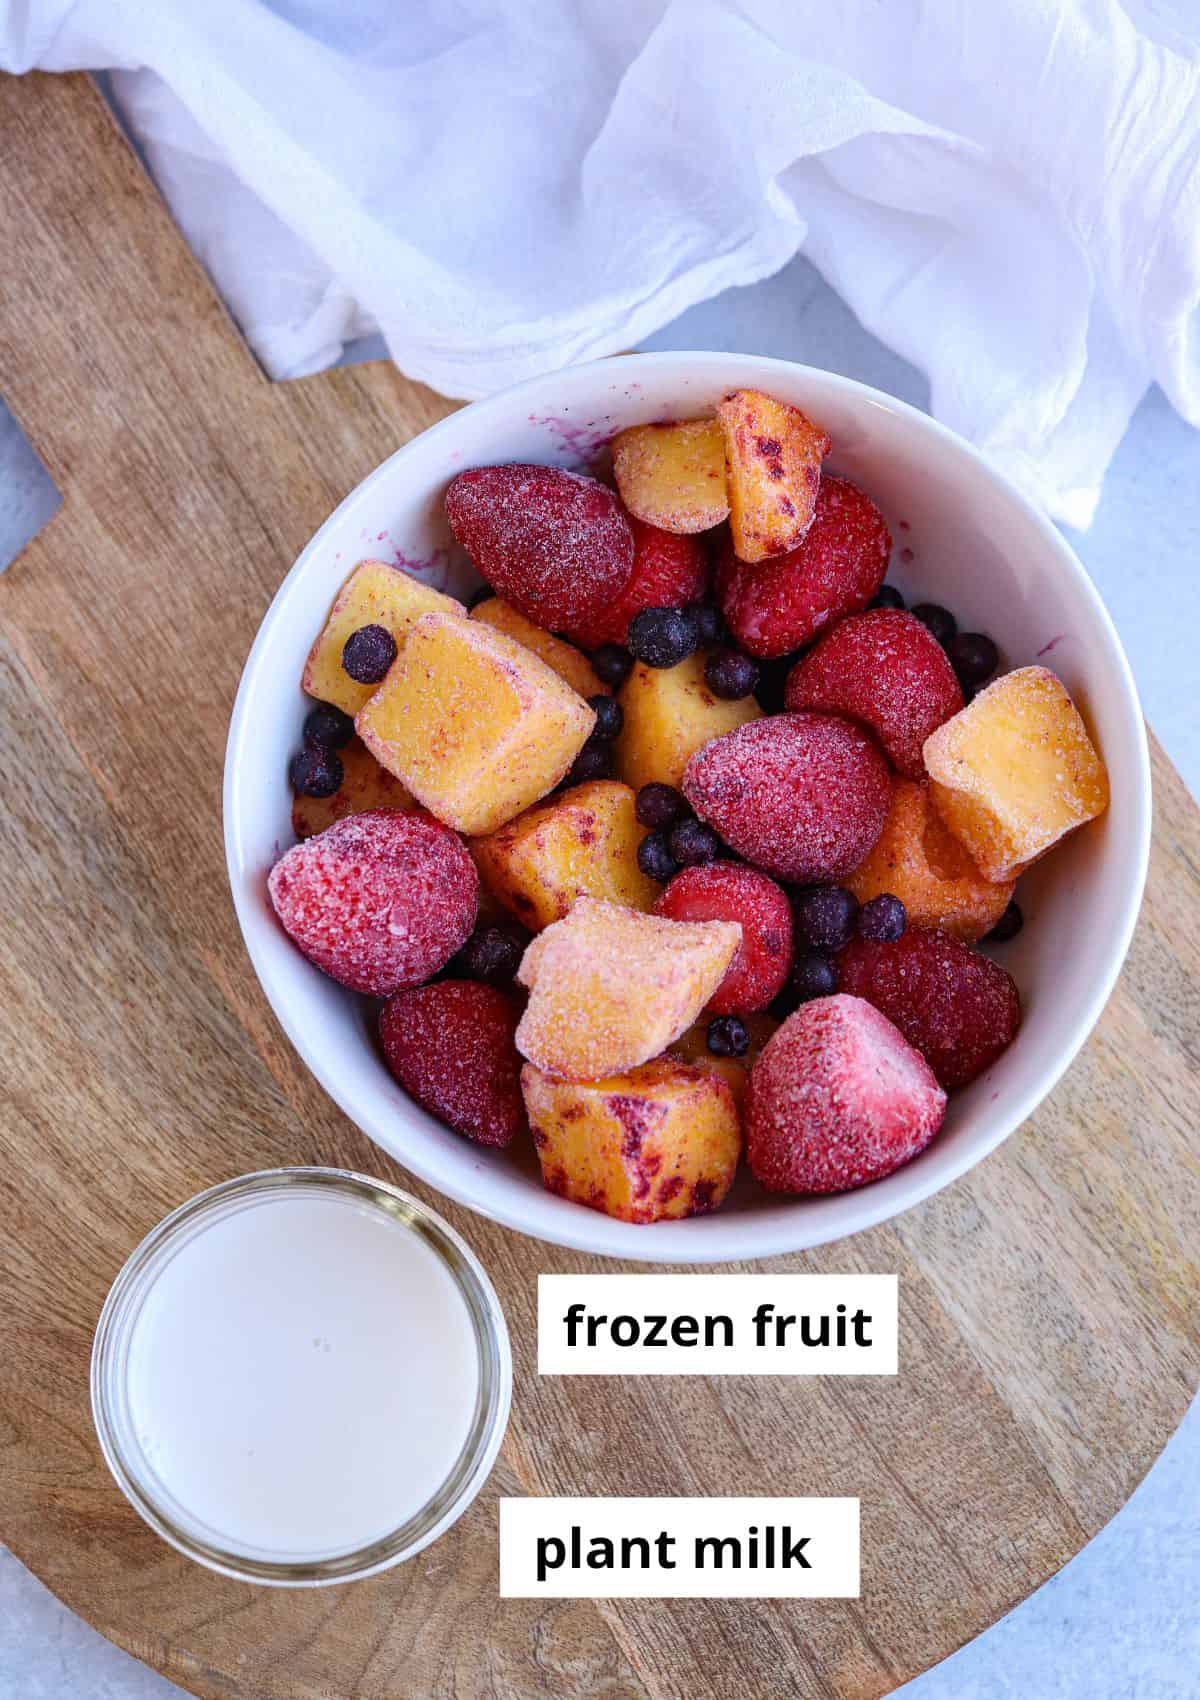 frozen fruit in a white bowl and a glass jar with plant milk on a wooden board.